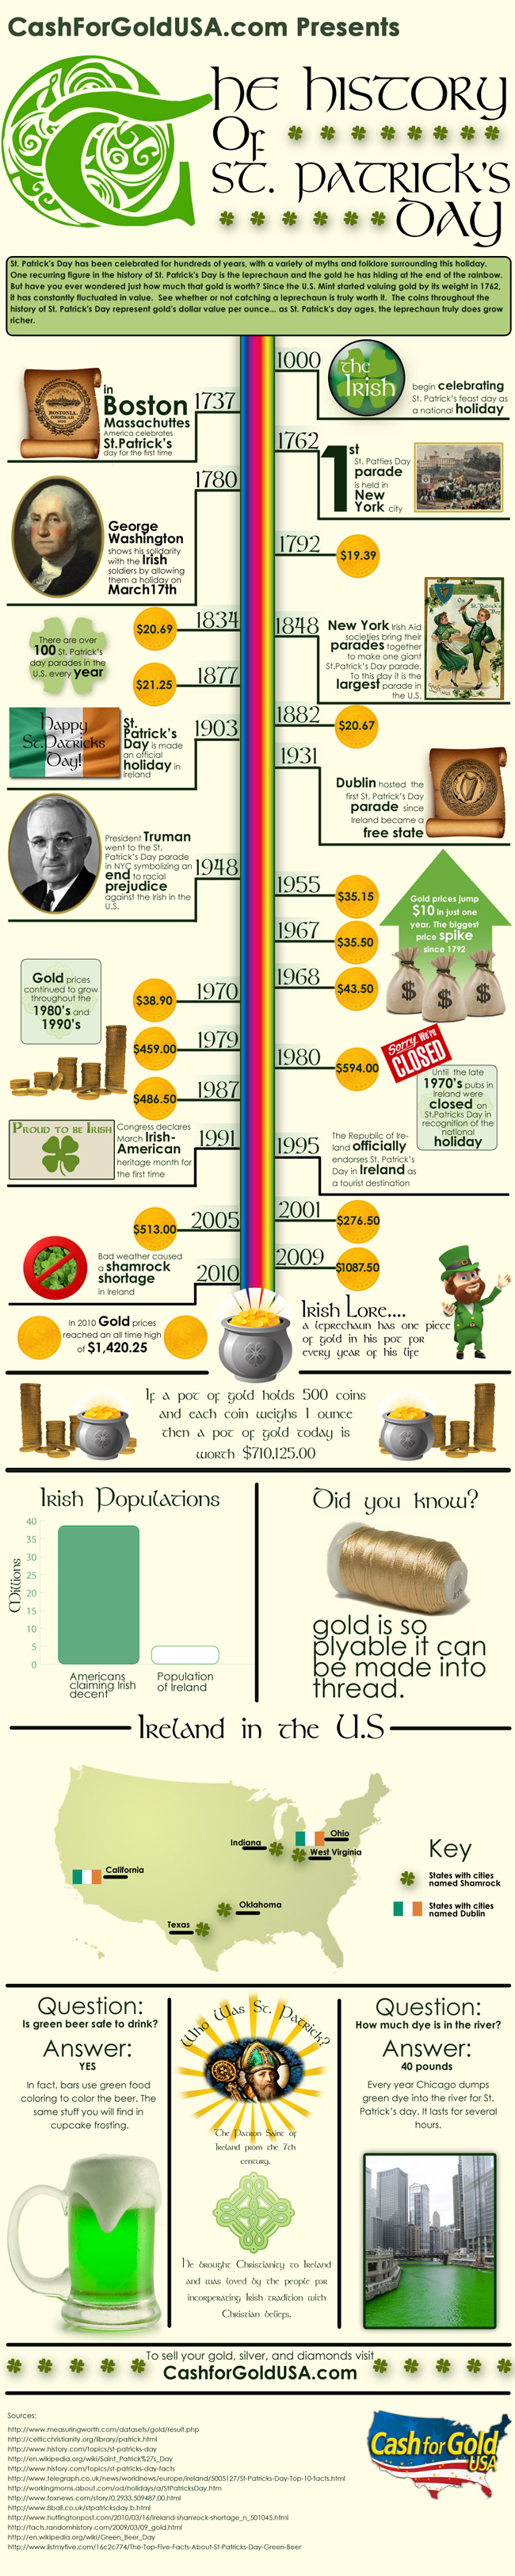 St Patrick's Day History infographic